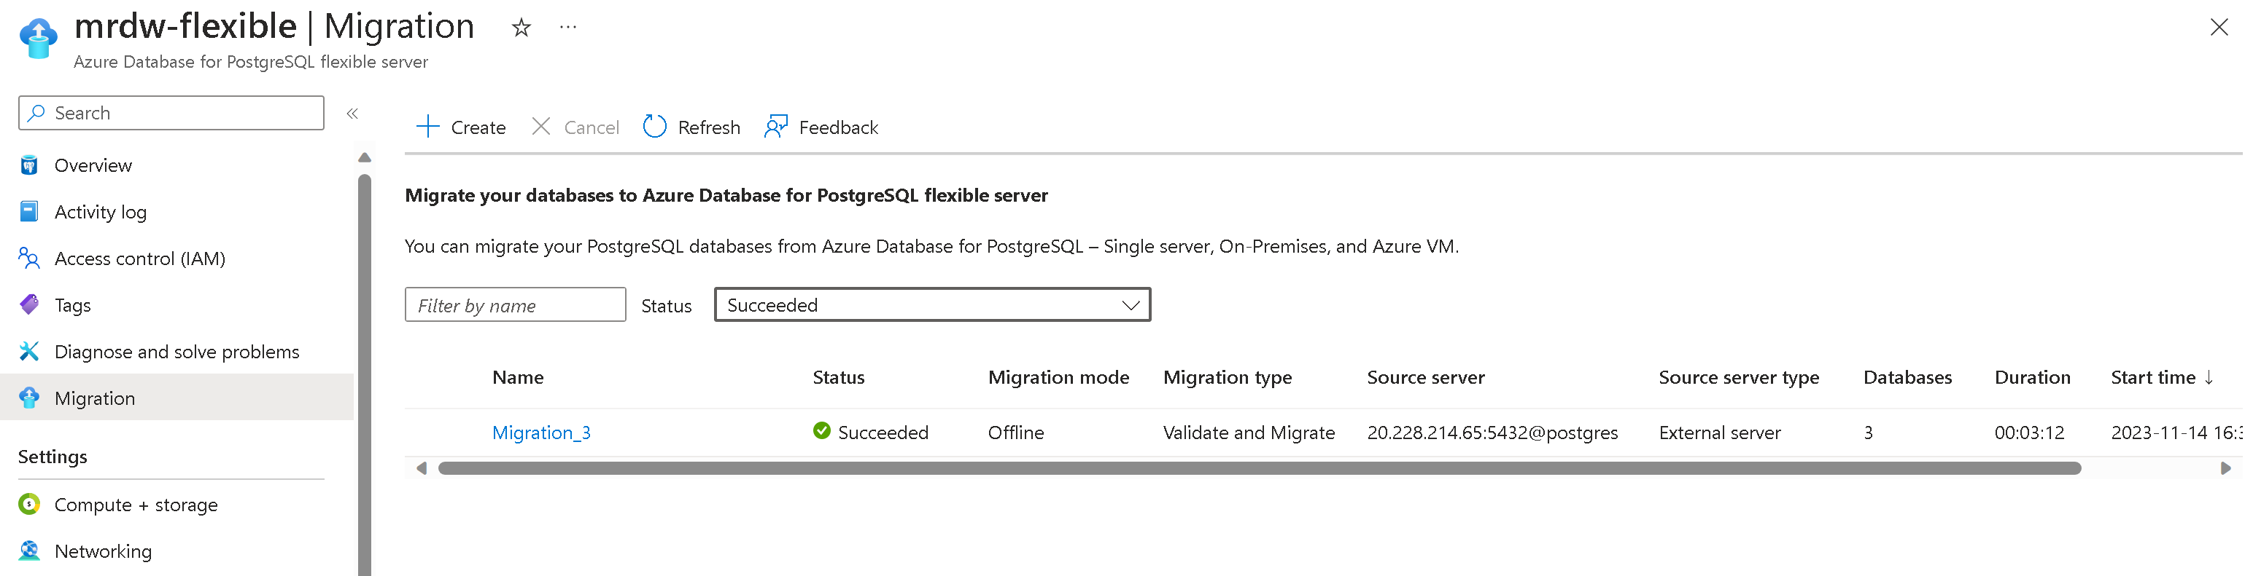 Screenshot of monitor migration in the Azure portal.